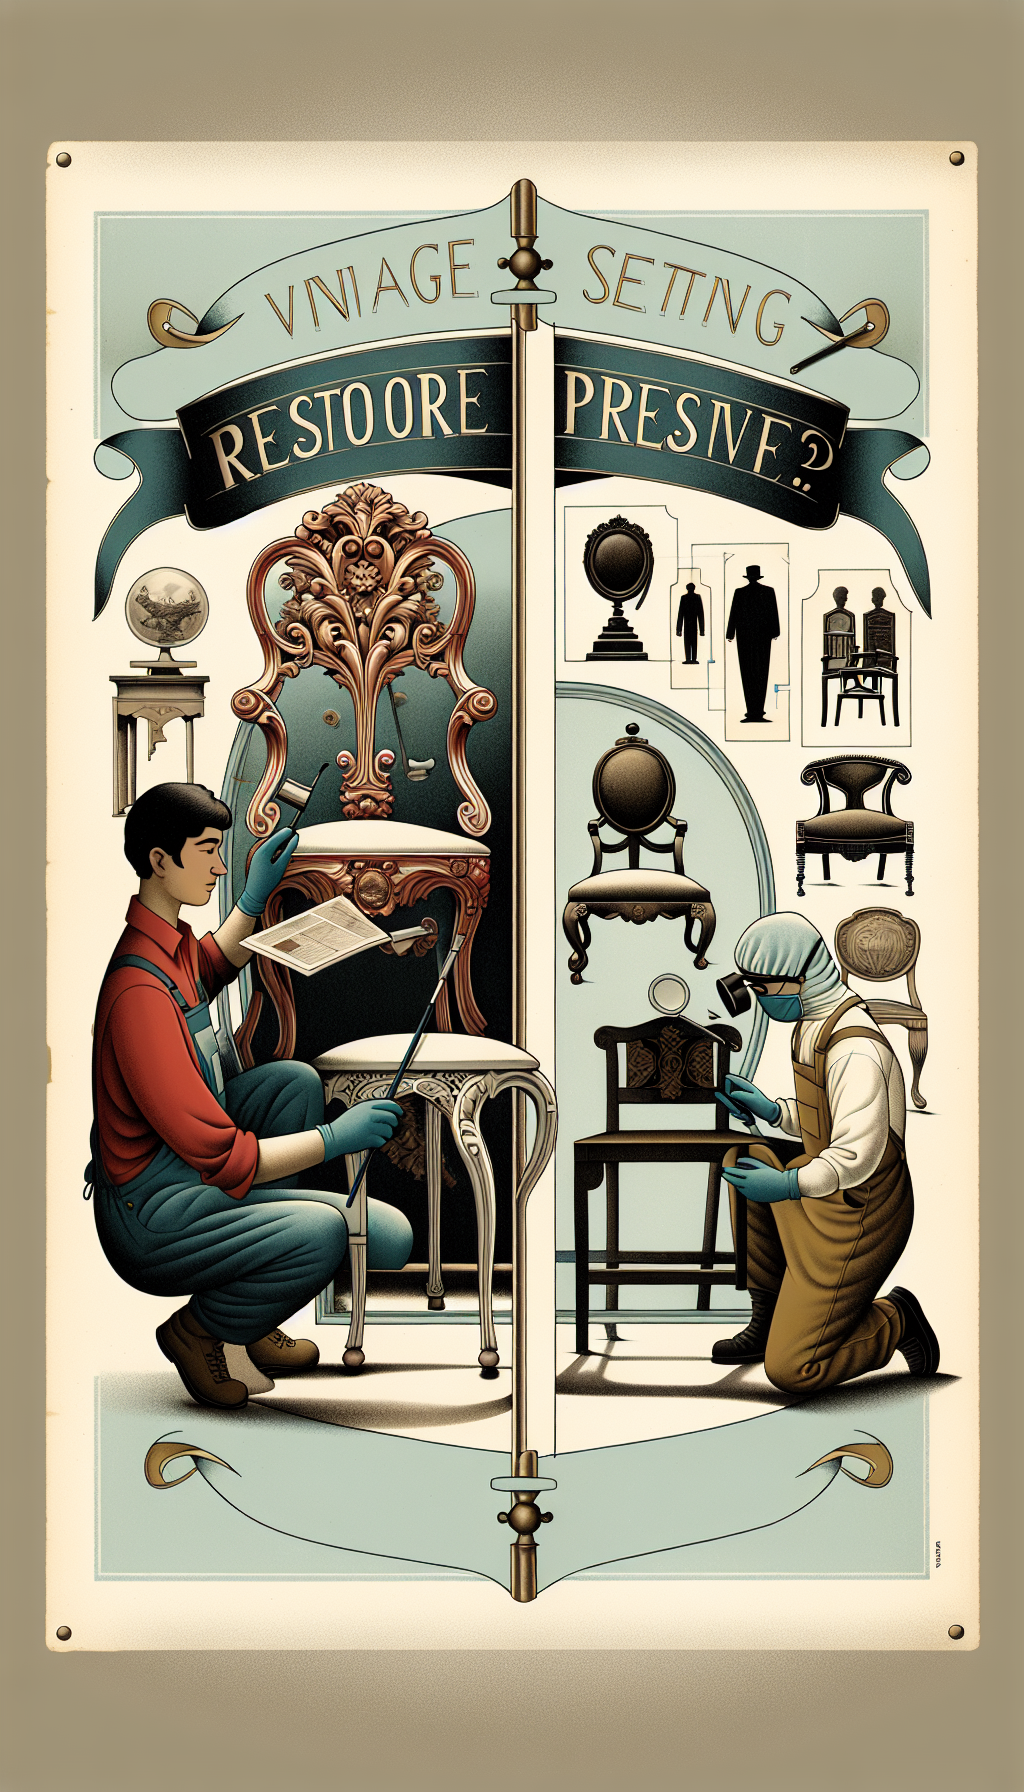 An elegant illustration splits the scene in half; on the left, a restorer delicately repaints a Rococo-style chair, its opulent curves and ornamentation being revived. On the right, under a gentle light, a conservator in gloves meticulously examines a Chippendale chair with a magnifying glass, ensuring its original state is preserved. A floating banner above reads, "Vintage Seating: Restore or Preserve?" with silhouettes of distinct chair backs framing the sides, subtlety hinting at an educational guide to identifying antique styles.